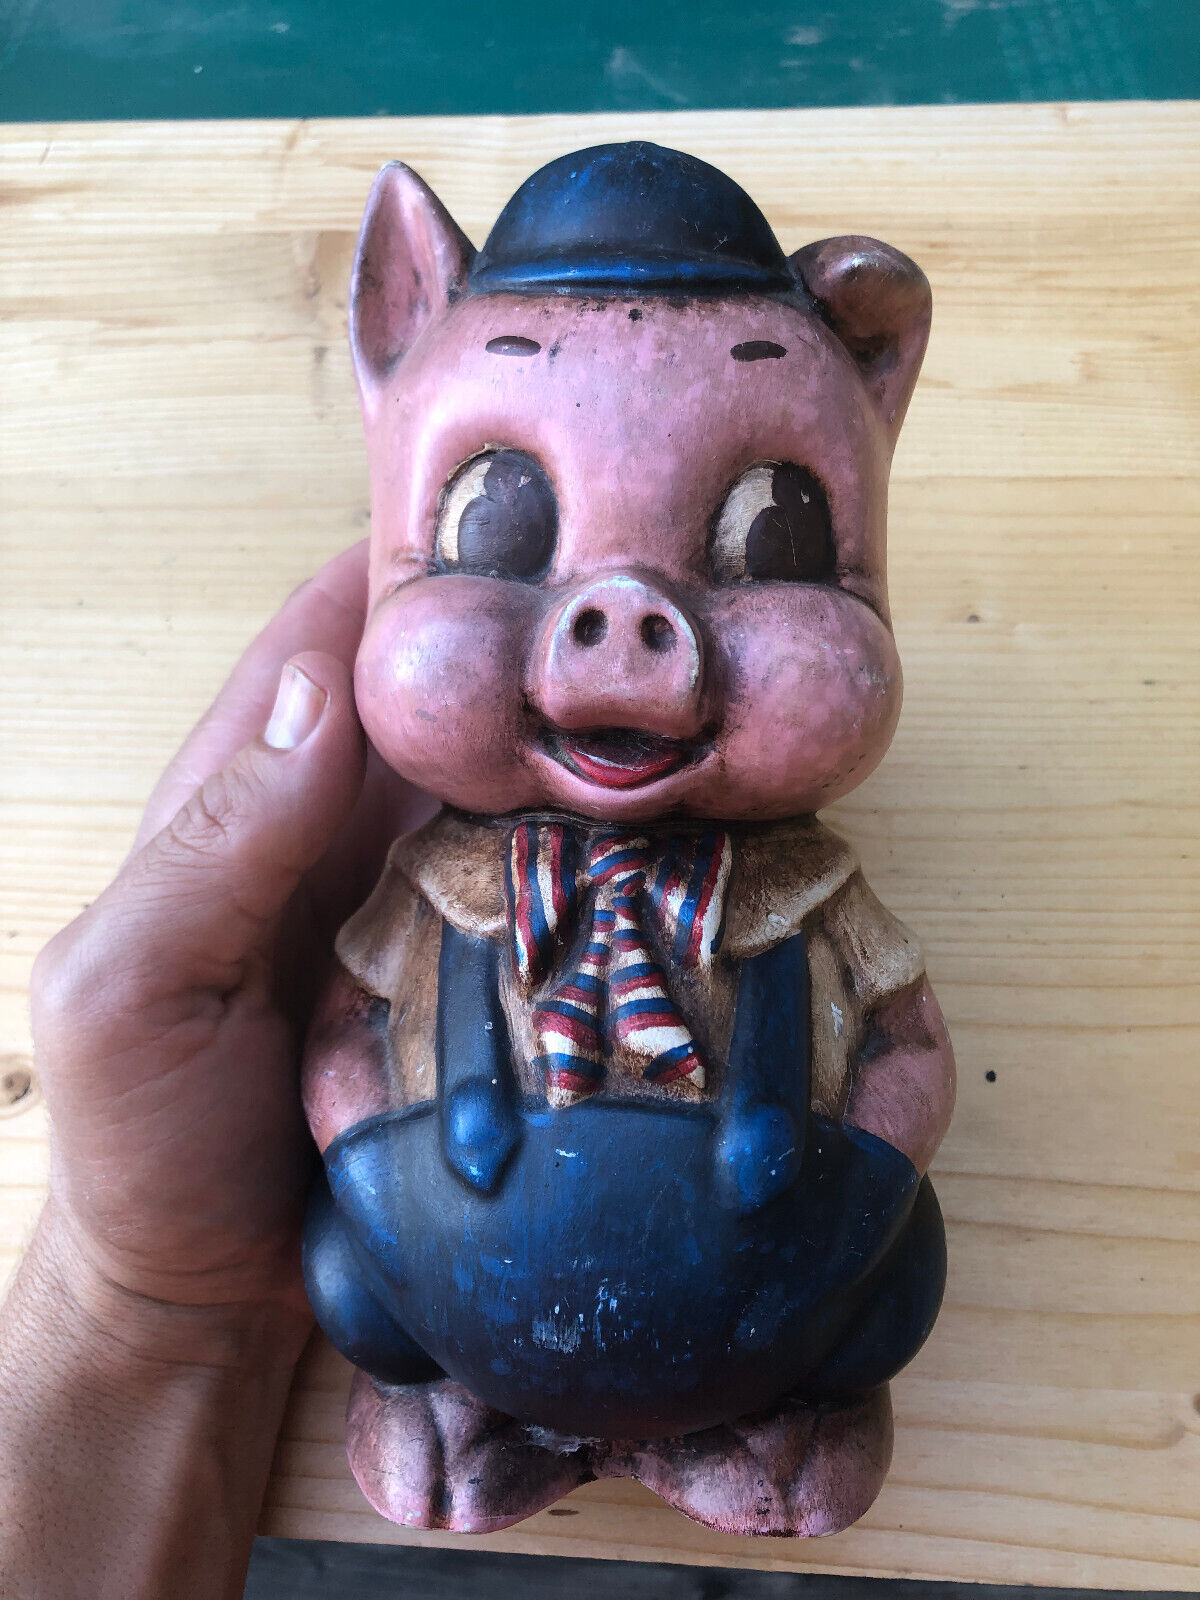 Vintage 1973 Hand Made Piggy Bank by Sharon May Ceramic Sculpted Clay Art Swine